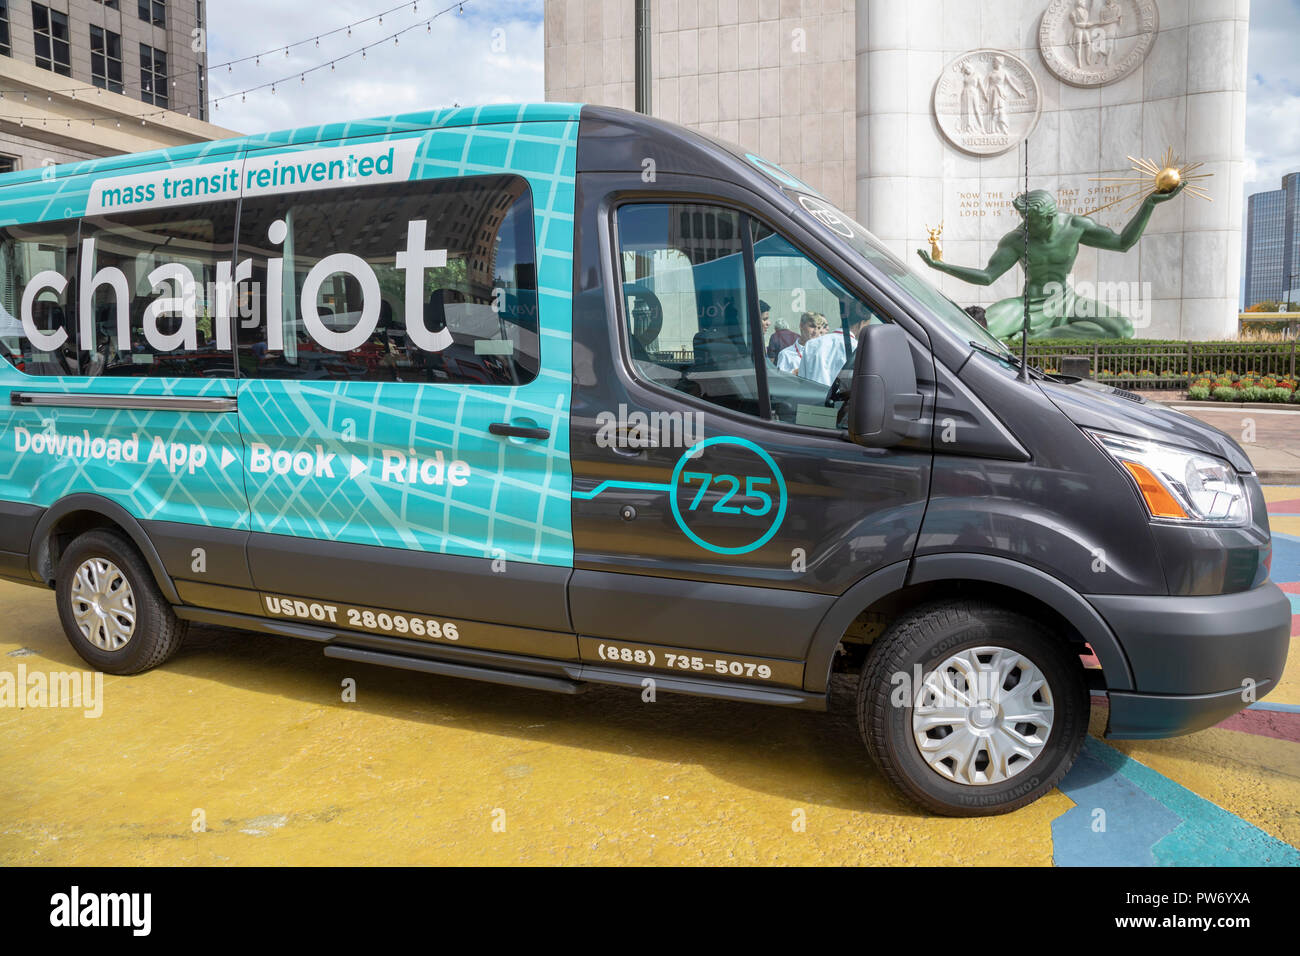 Detroit, Michigan - A van from the Chariot commuter shuttle service on display at the Detroit Moves Mobility Festival. Chariot is owned by Ford Motor  Stock Photo